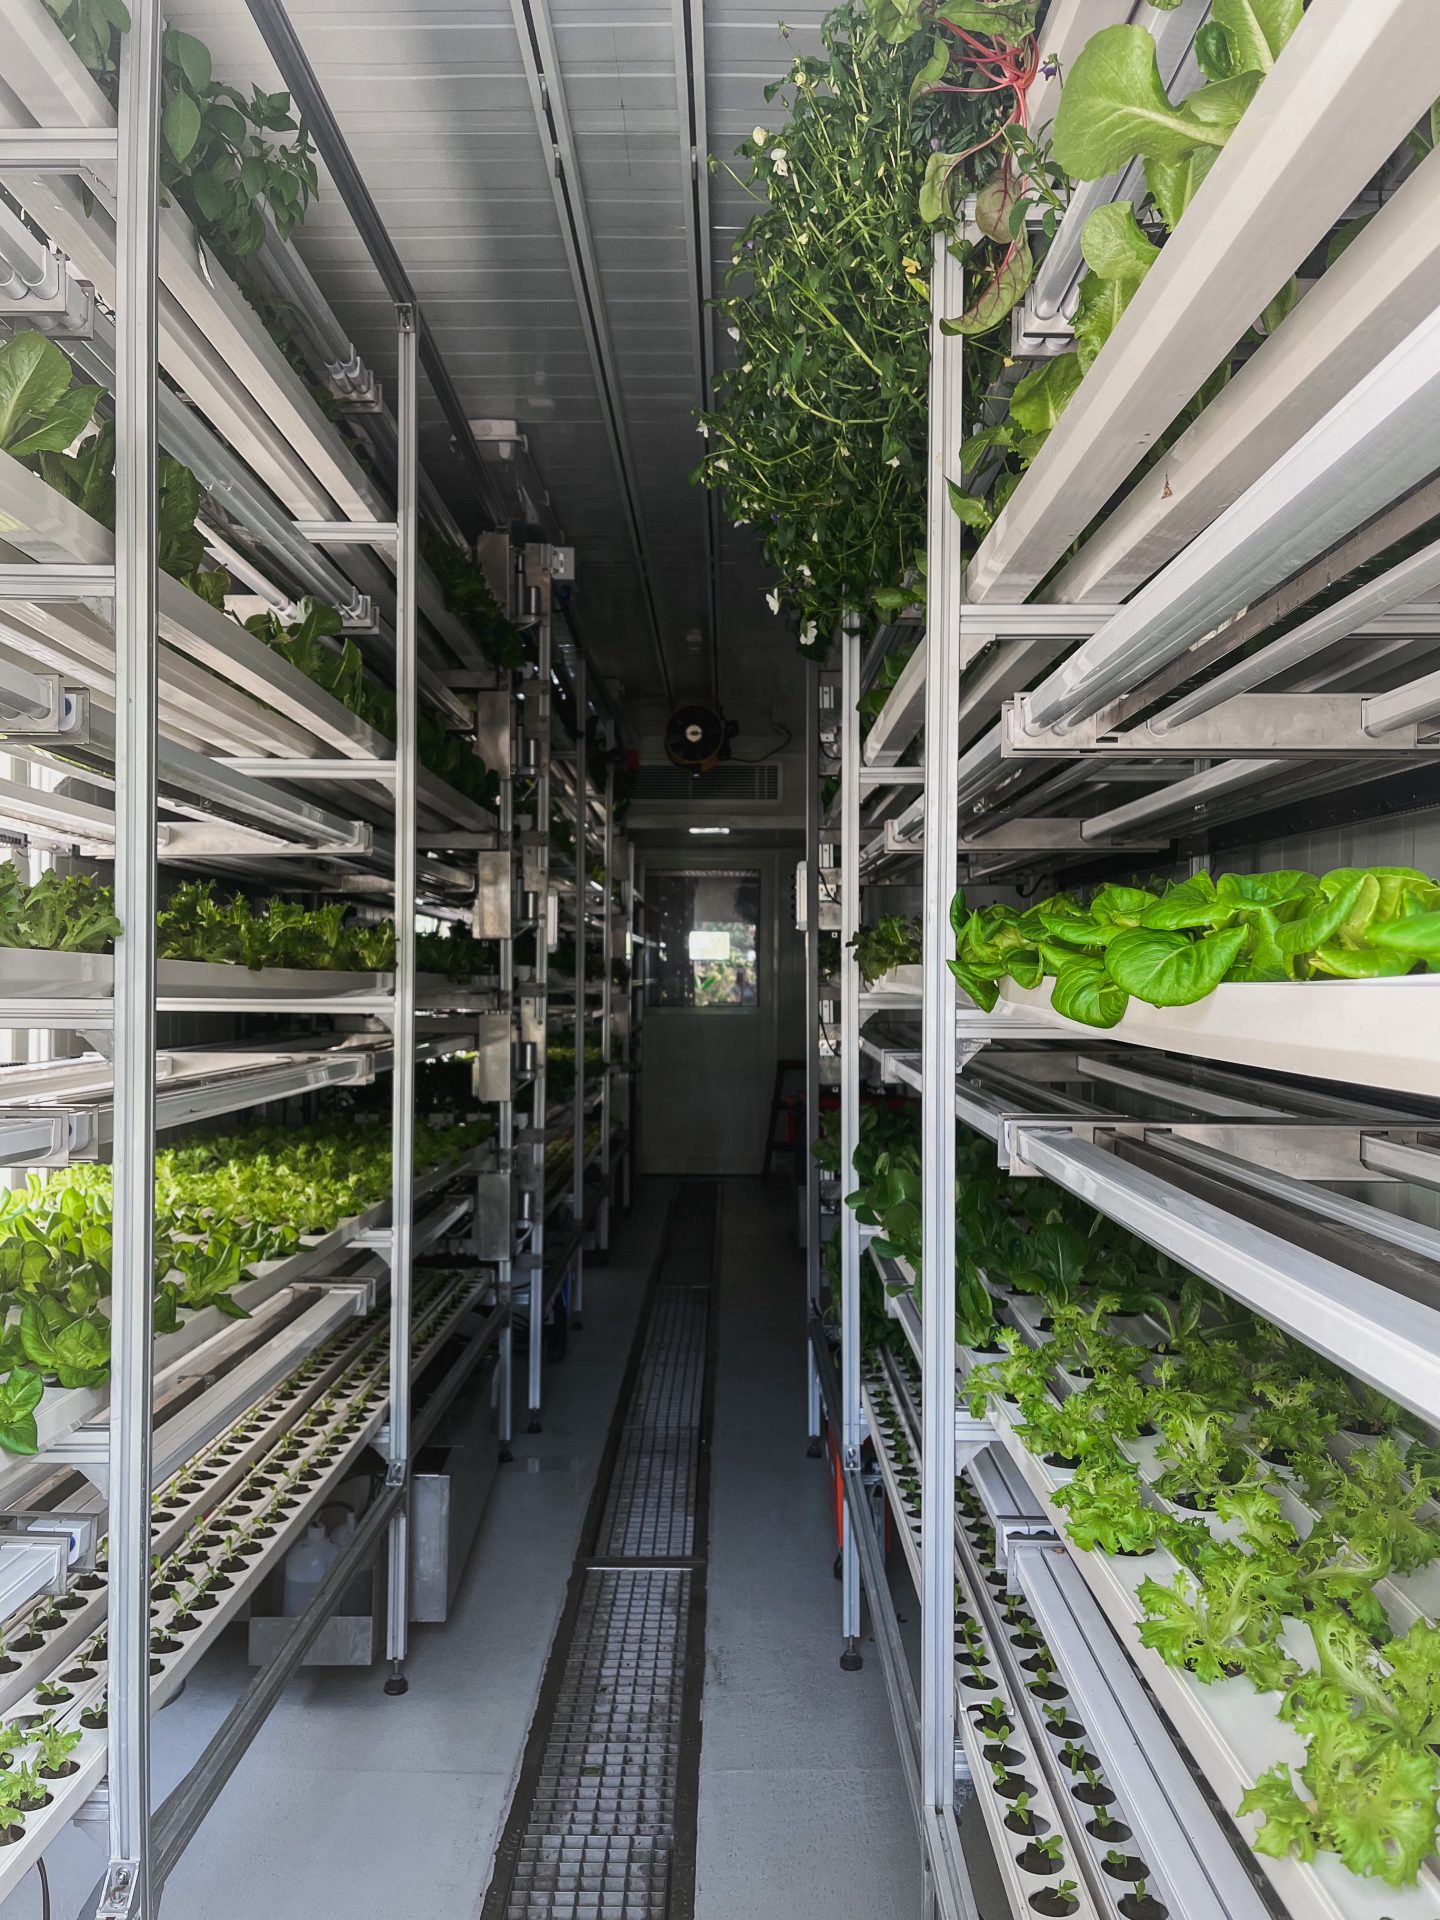 Simple affordable vertical farming